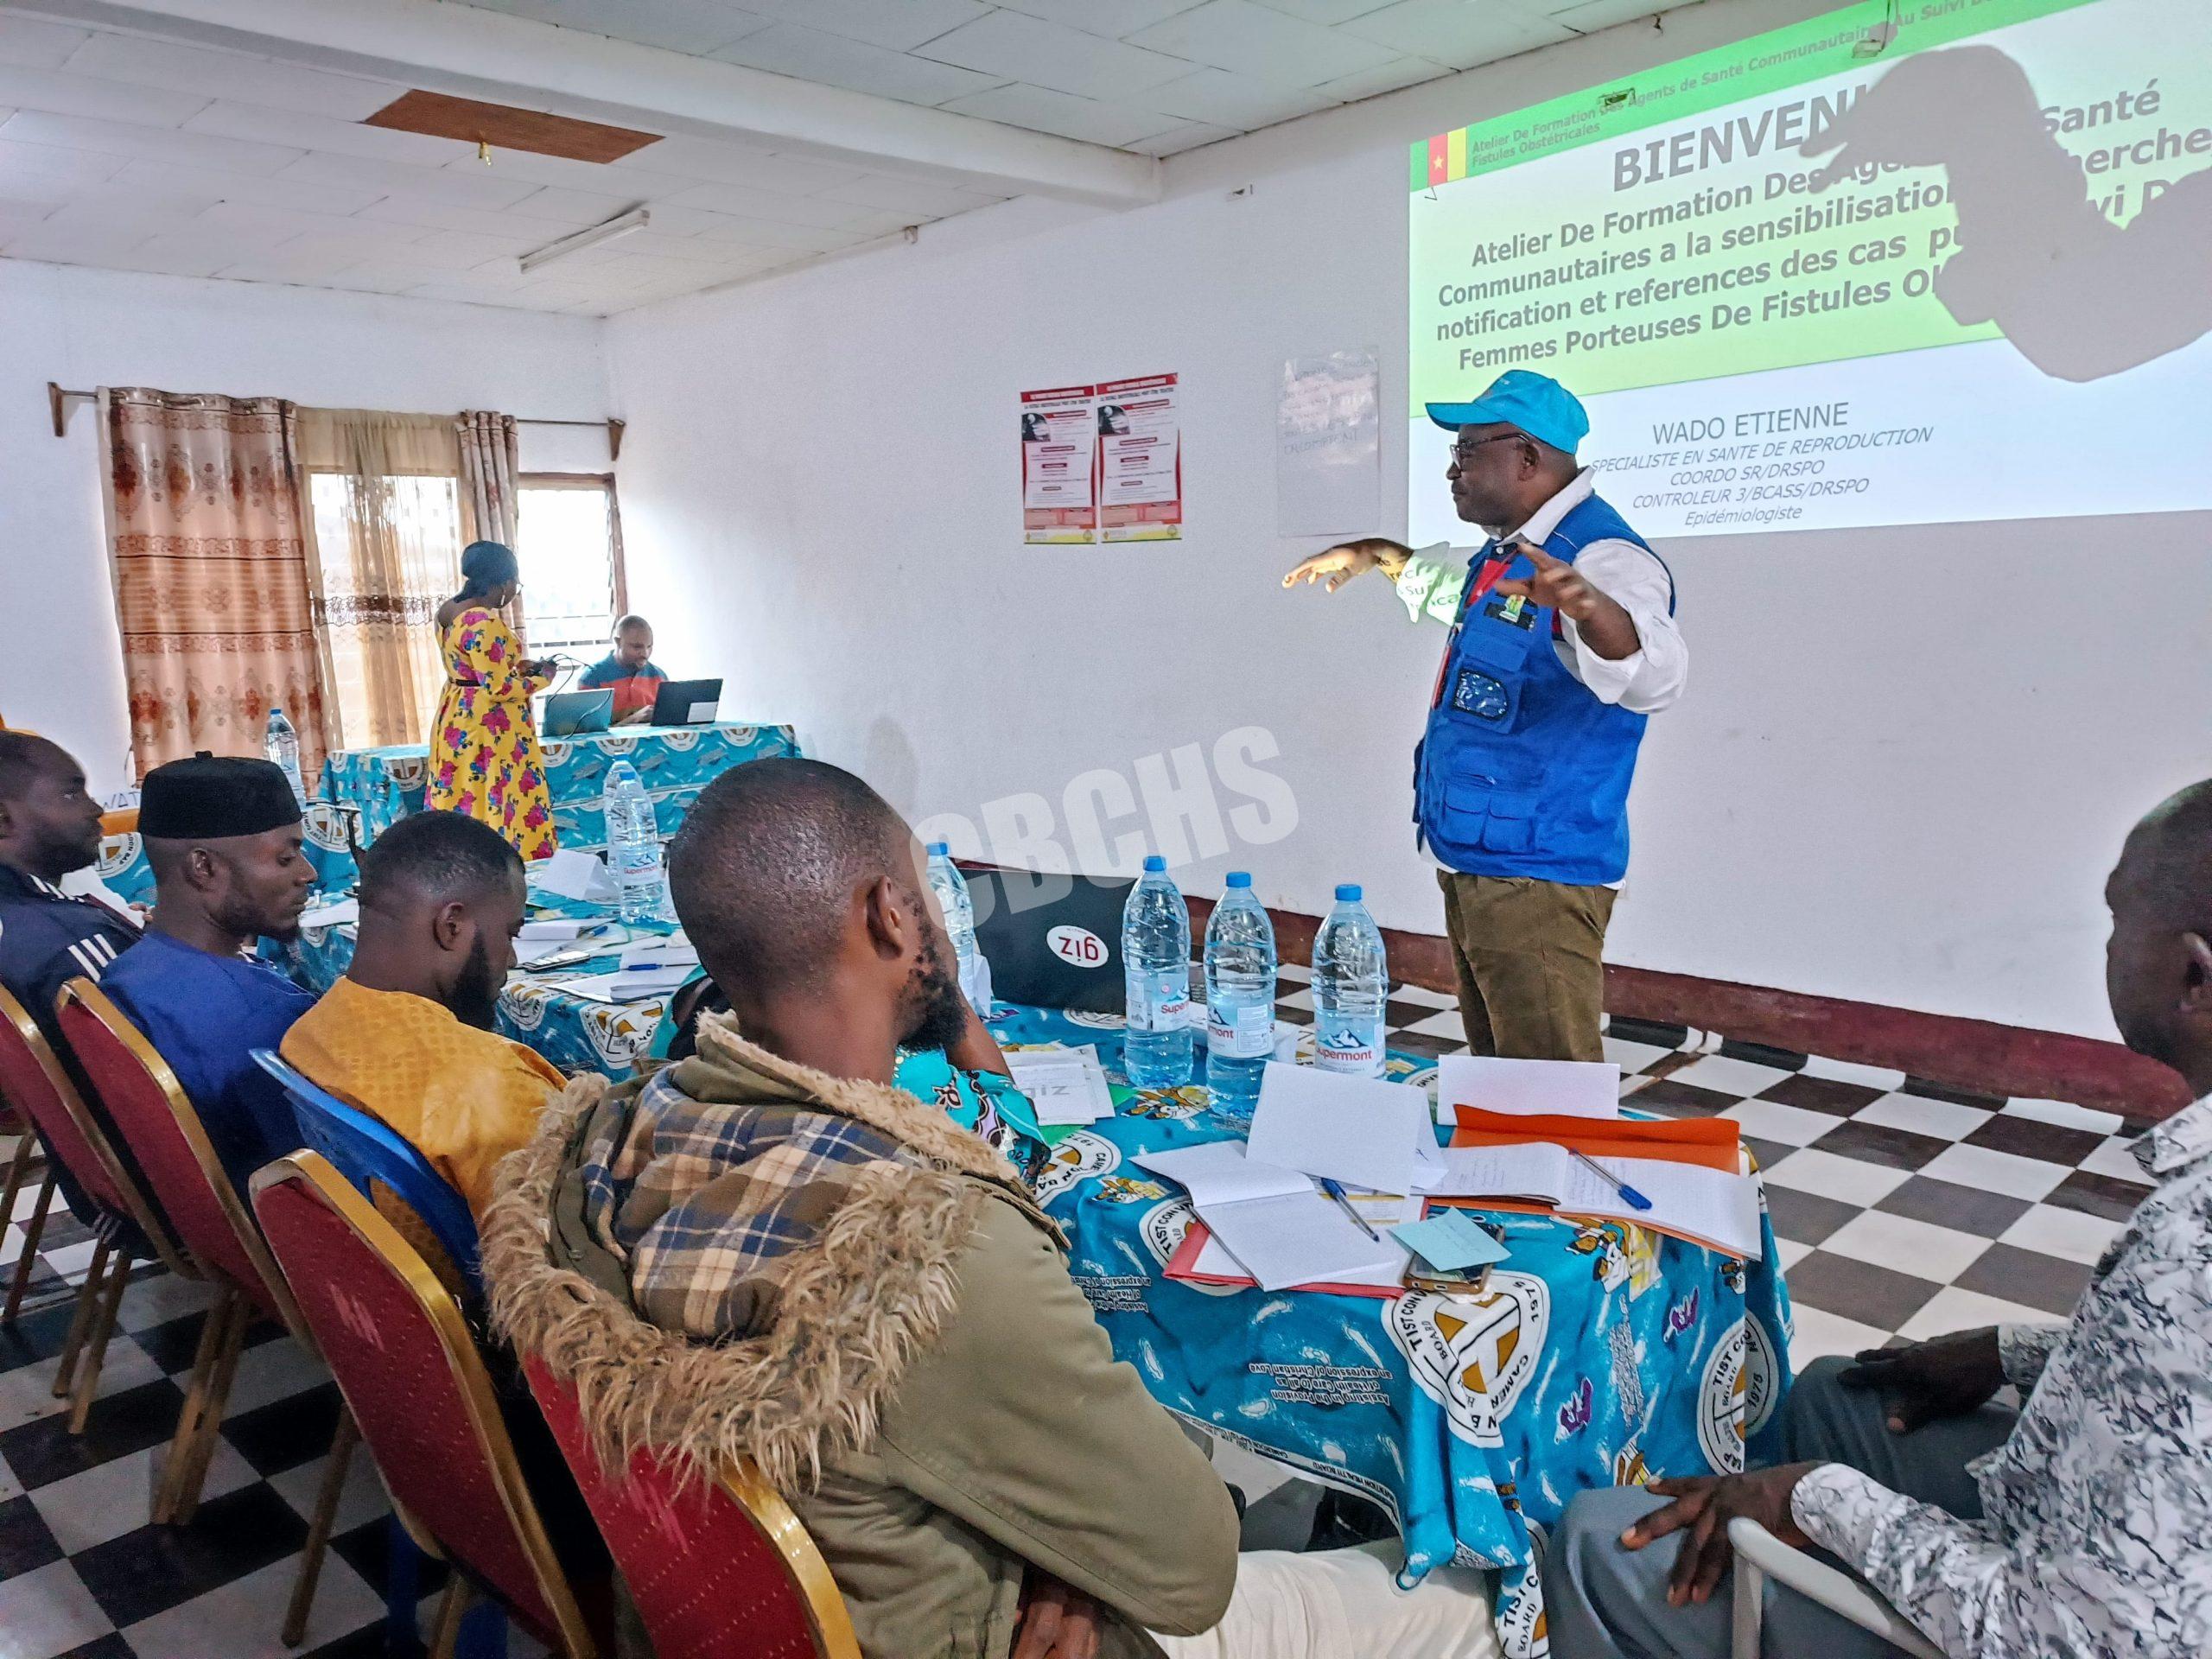 Mr Wado Etienne guiding participants on strategies to identify and raise awareness on Fistula